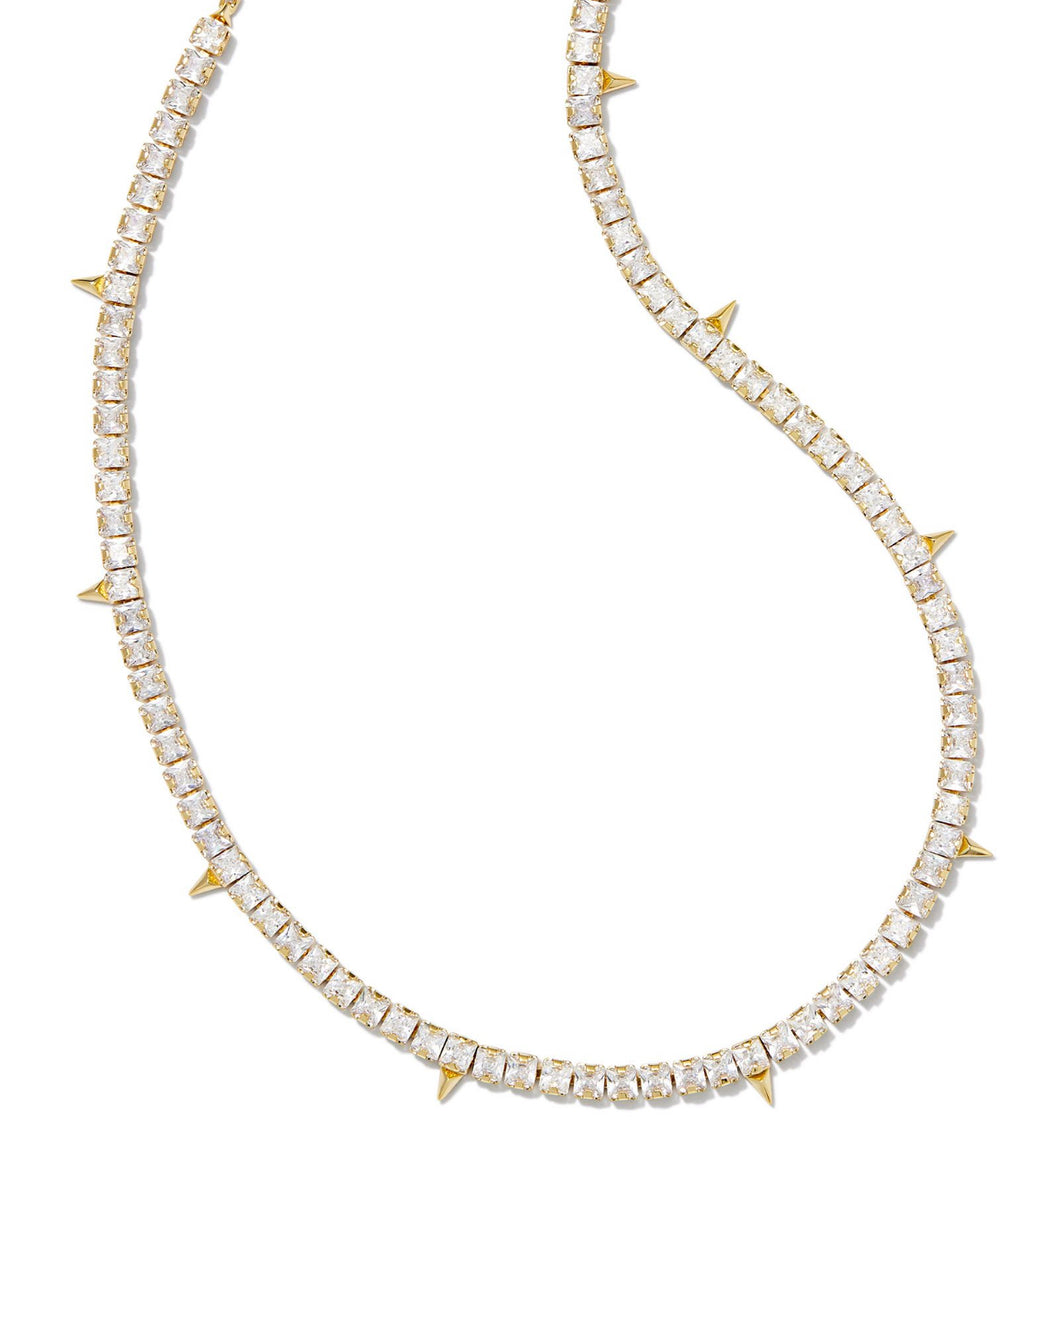 Kendra Scott: Jacqueline Tennis Necklace in Gold White Crystal